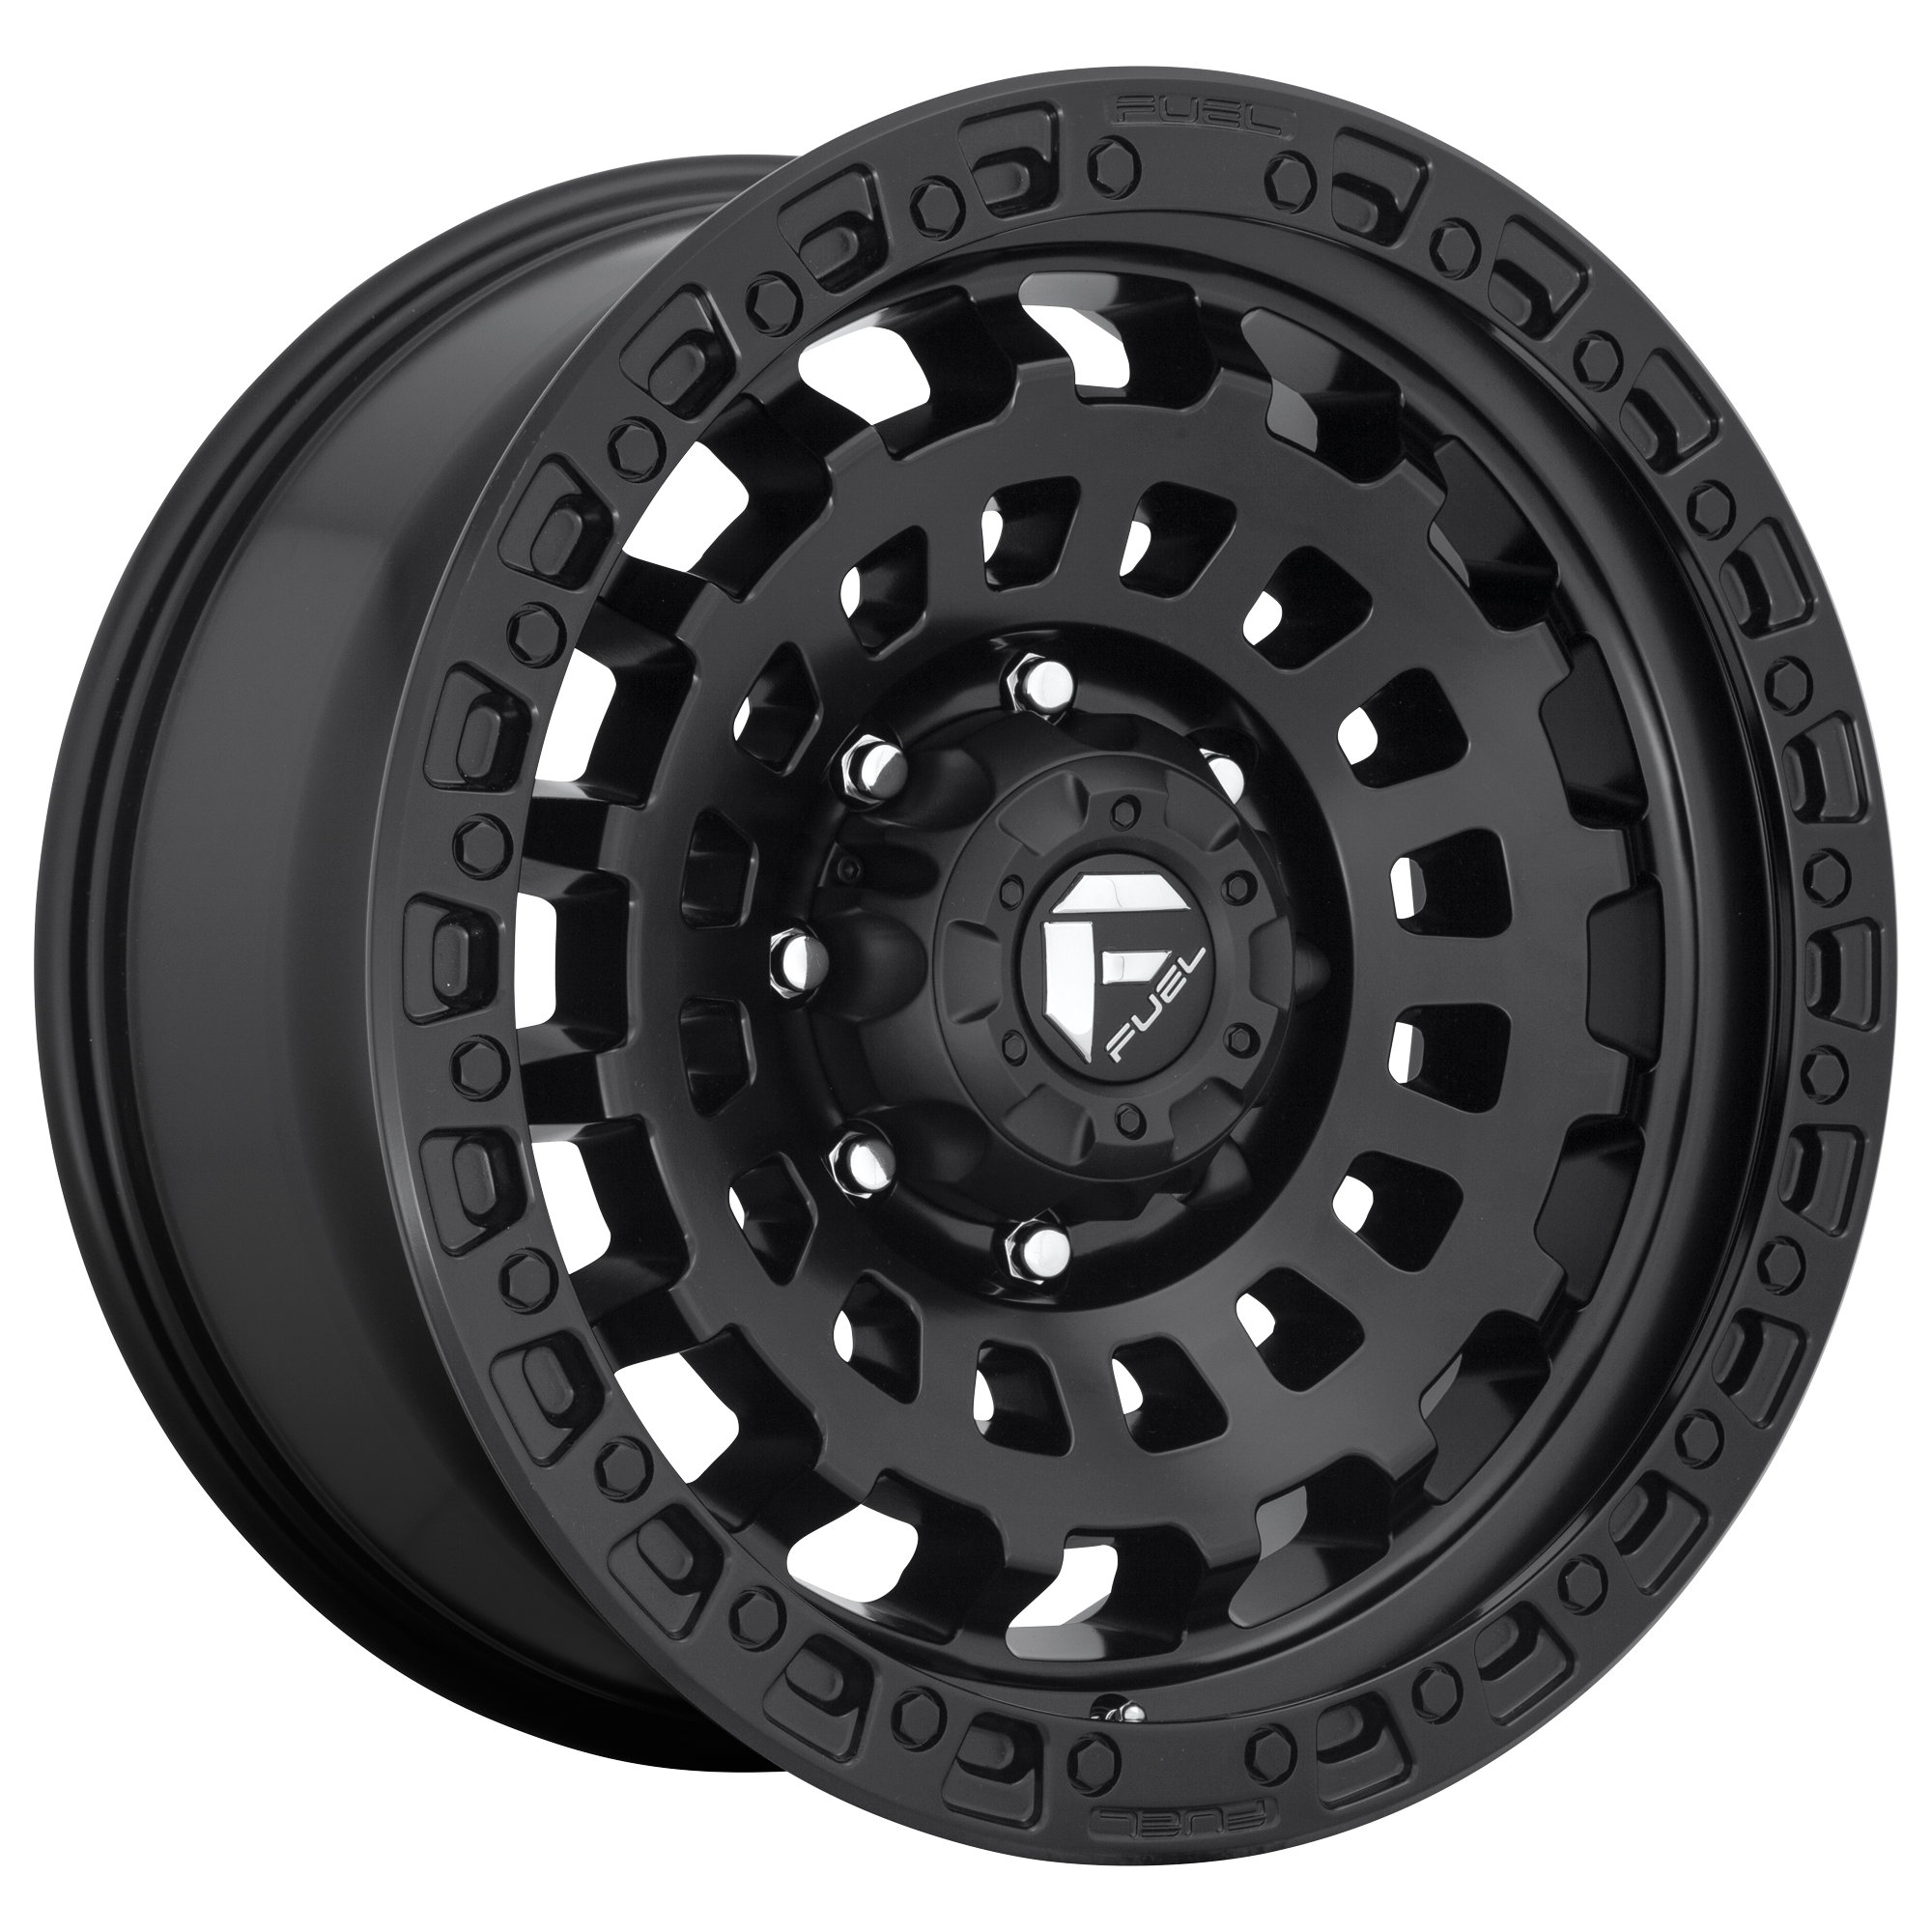 ZEPHYR 20x9 6x139.70 MATTE BLACK (1 mm) - Tires and Engine Performance